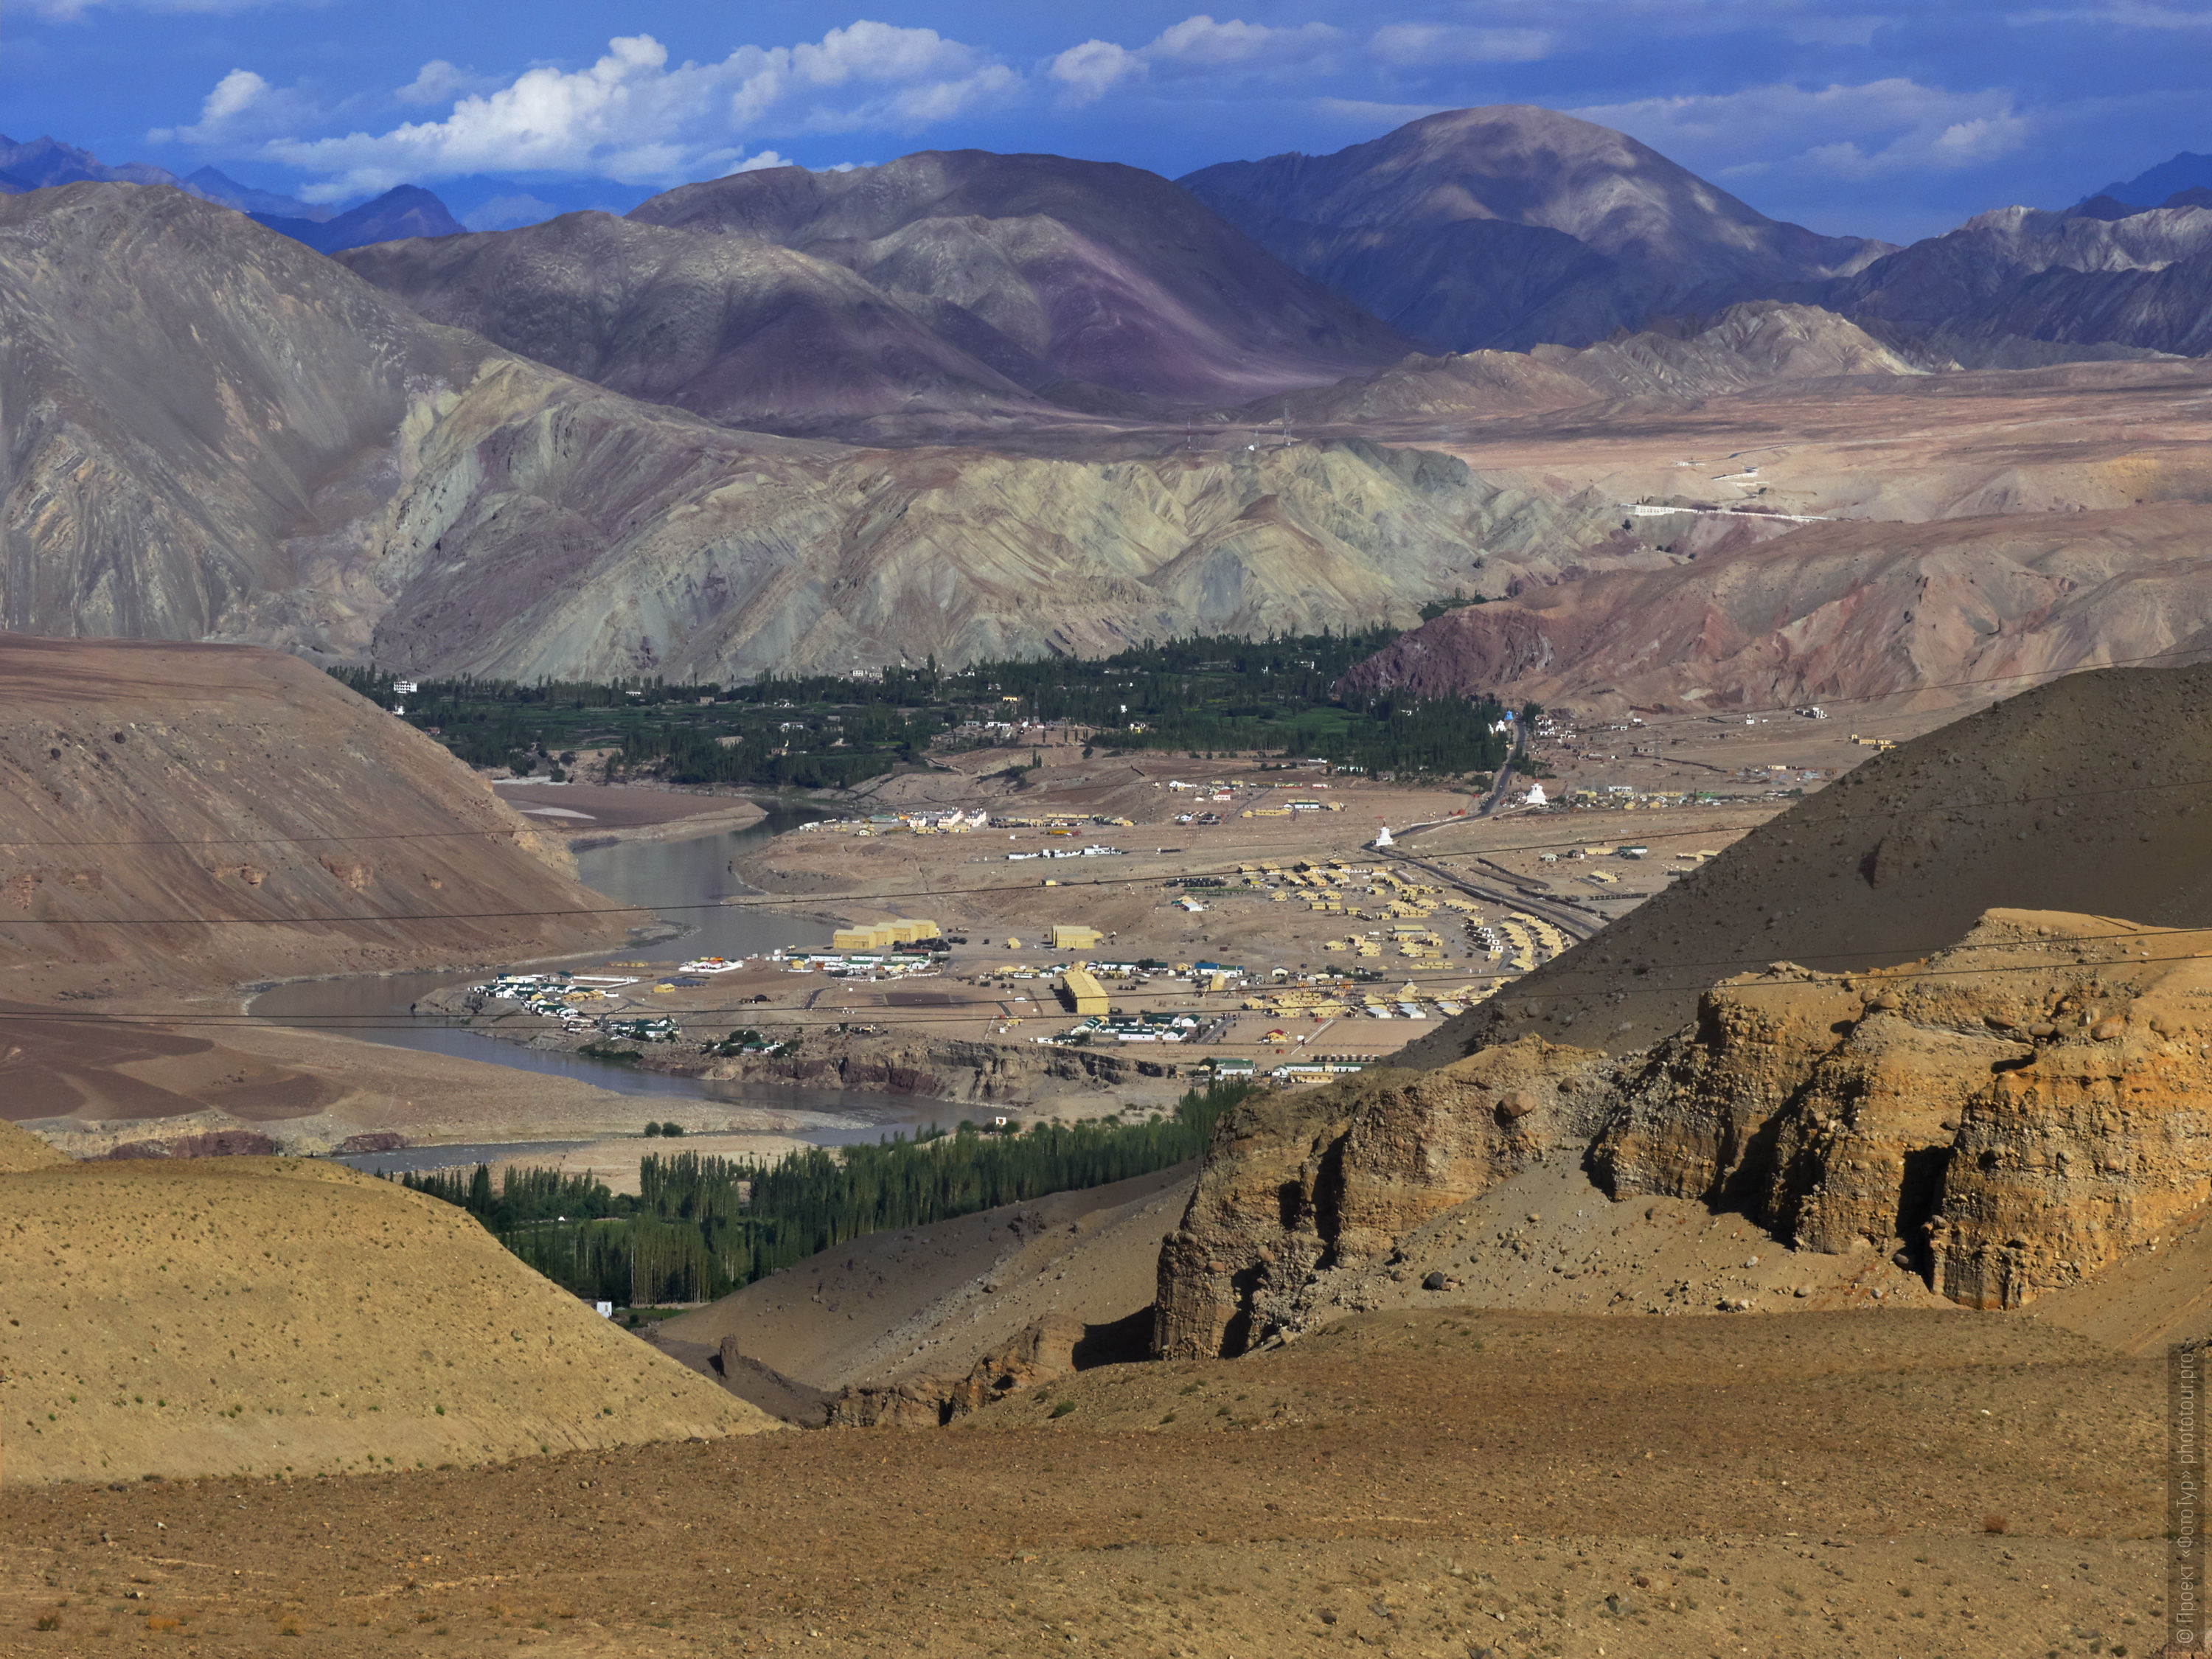 Valley of the Indus River. Tour for artists in Tibet: Watercolor-1: Watercolor painting in Ladakh with Pavel Pugachev, 04.08. - 13.08. 2019.